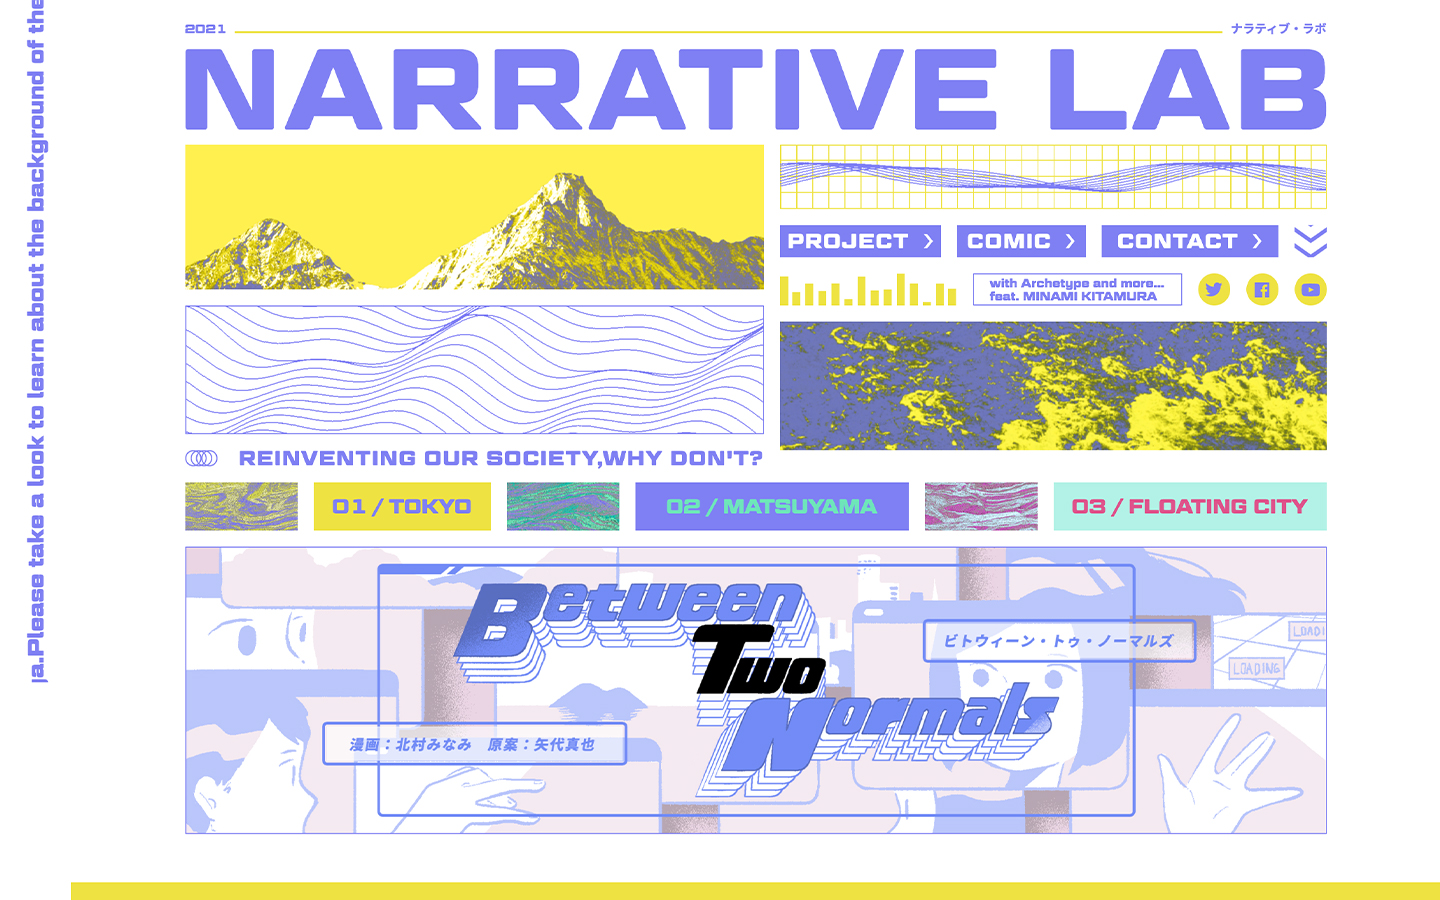 SFコミック『Between Two Normals』feat. MINAMI KITAMURA by NARRATIVE LAB